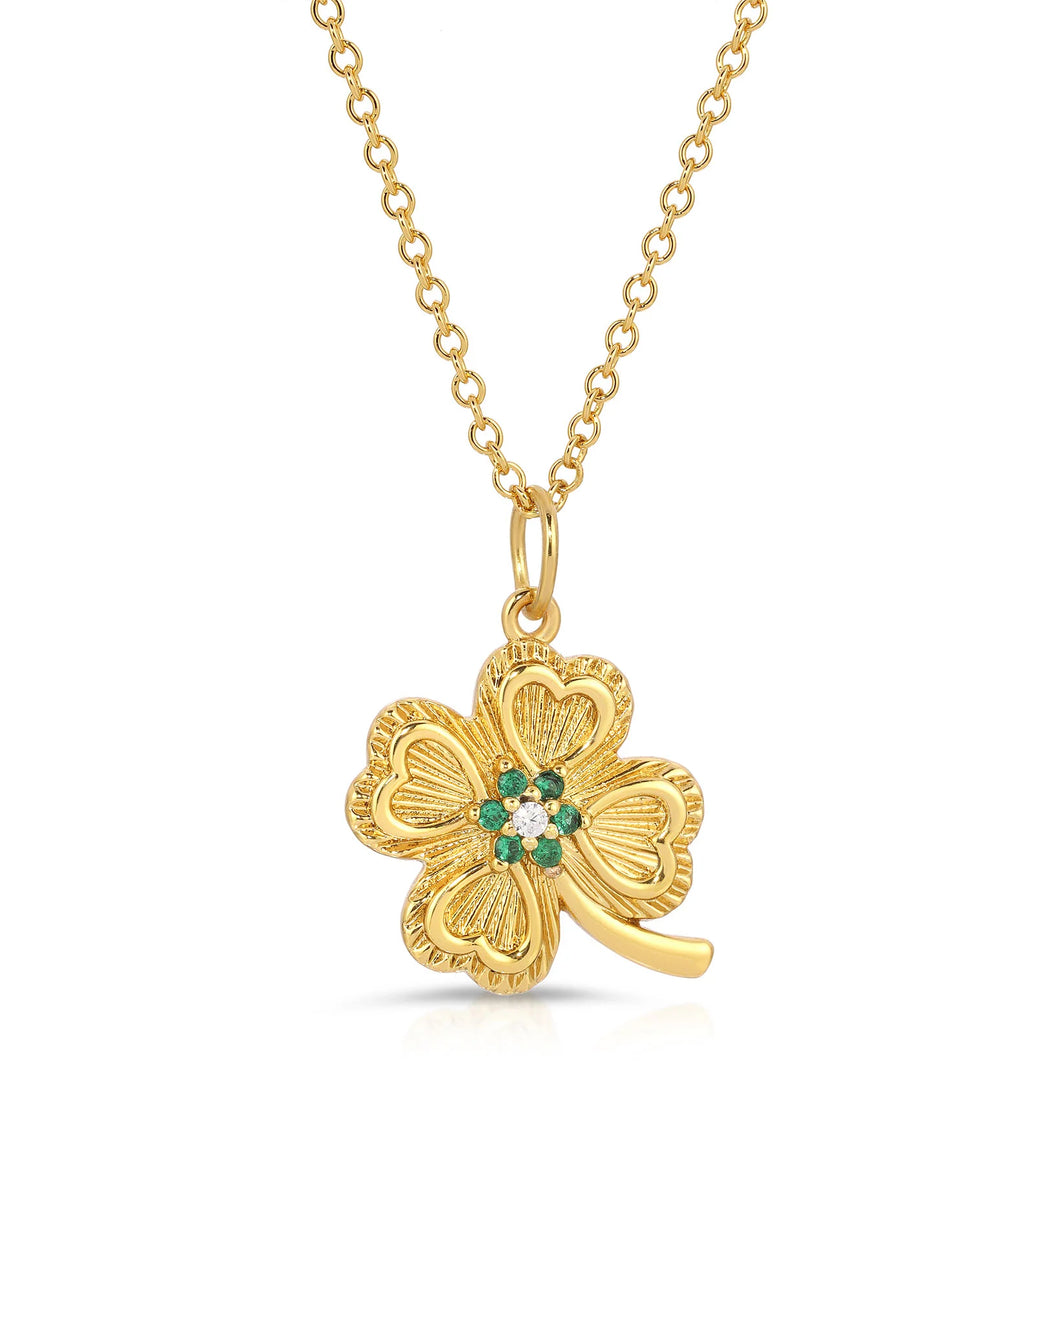 Gold Lucky Clover Necklace with Emerald